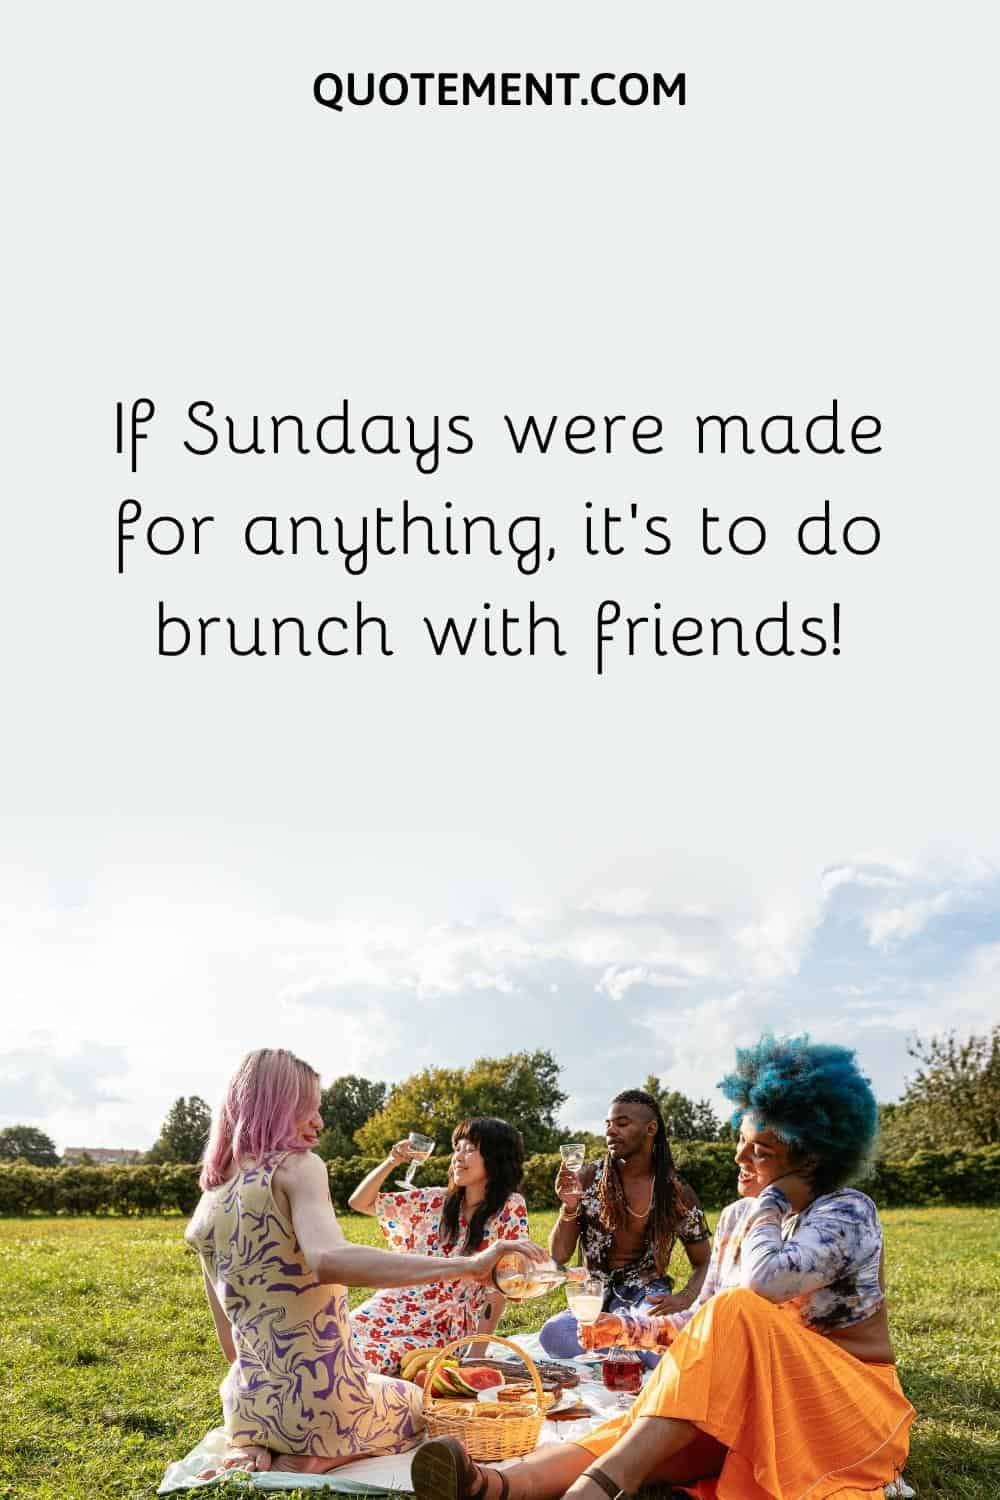 If Sundays were made for anything, it's to do brunch with friends!